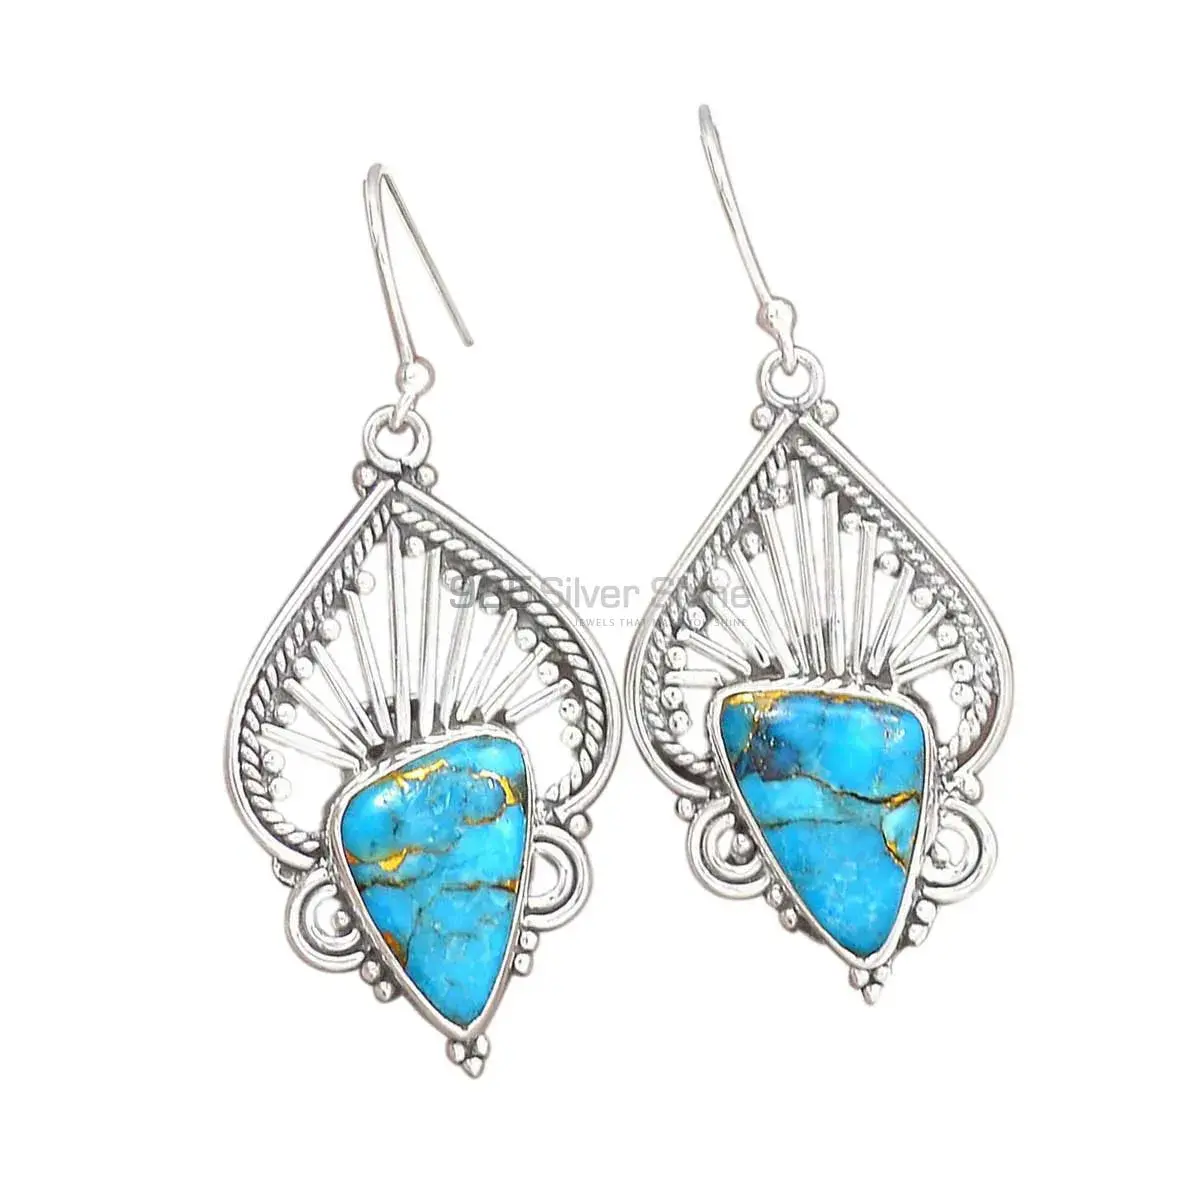 Solid 925 Silver Earrings In Natural Turquoise Gemstone 925SE2646